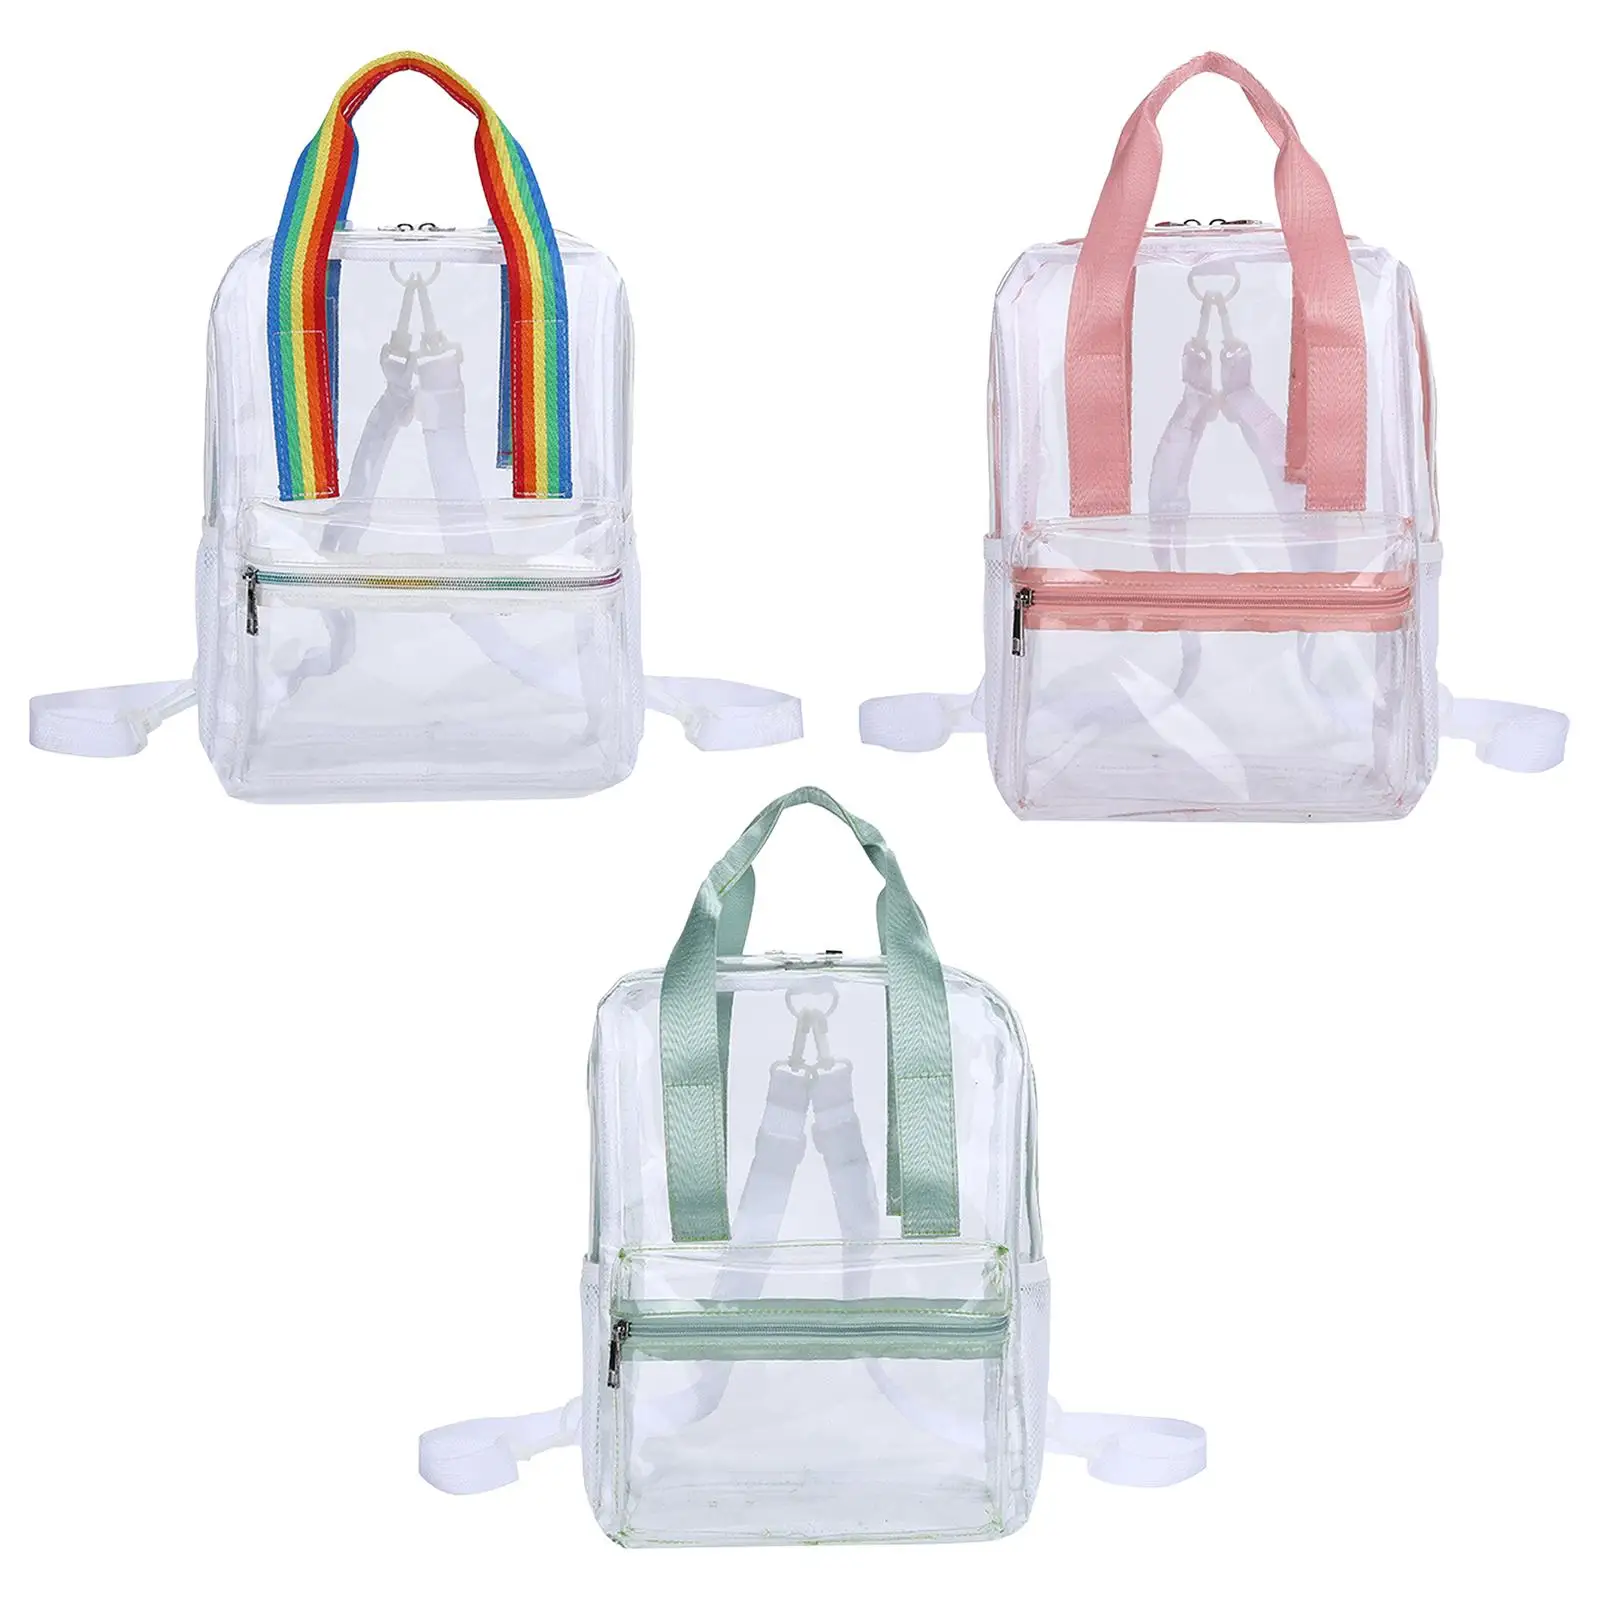 PVC Backpack Girls Boys Large Rucksack with Front Pocket Transparent Bag School for Hiking Outdoor Concert Swimming Sports